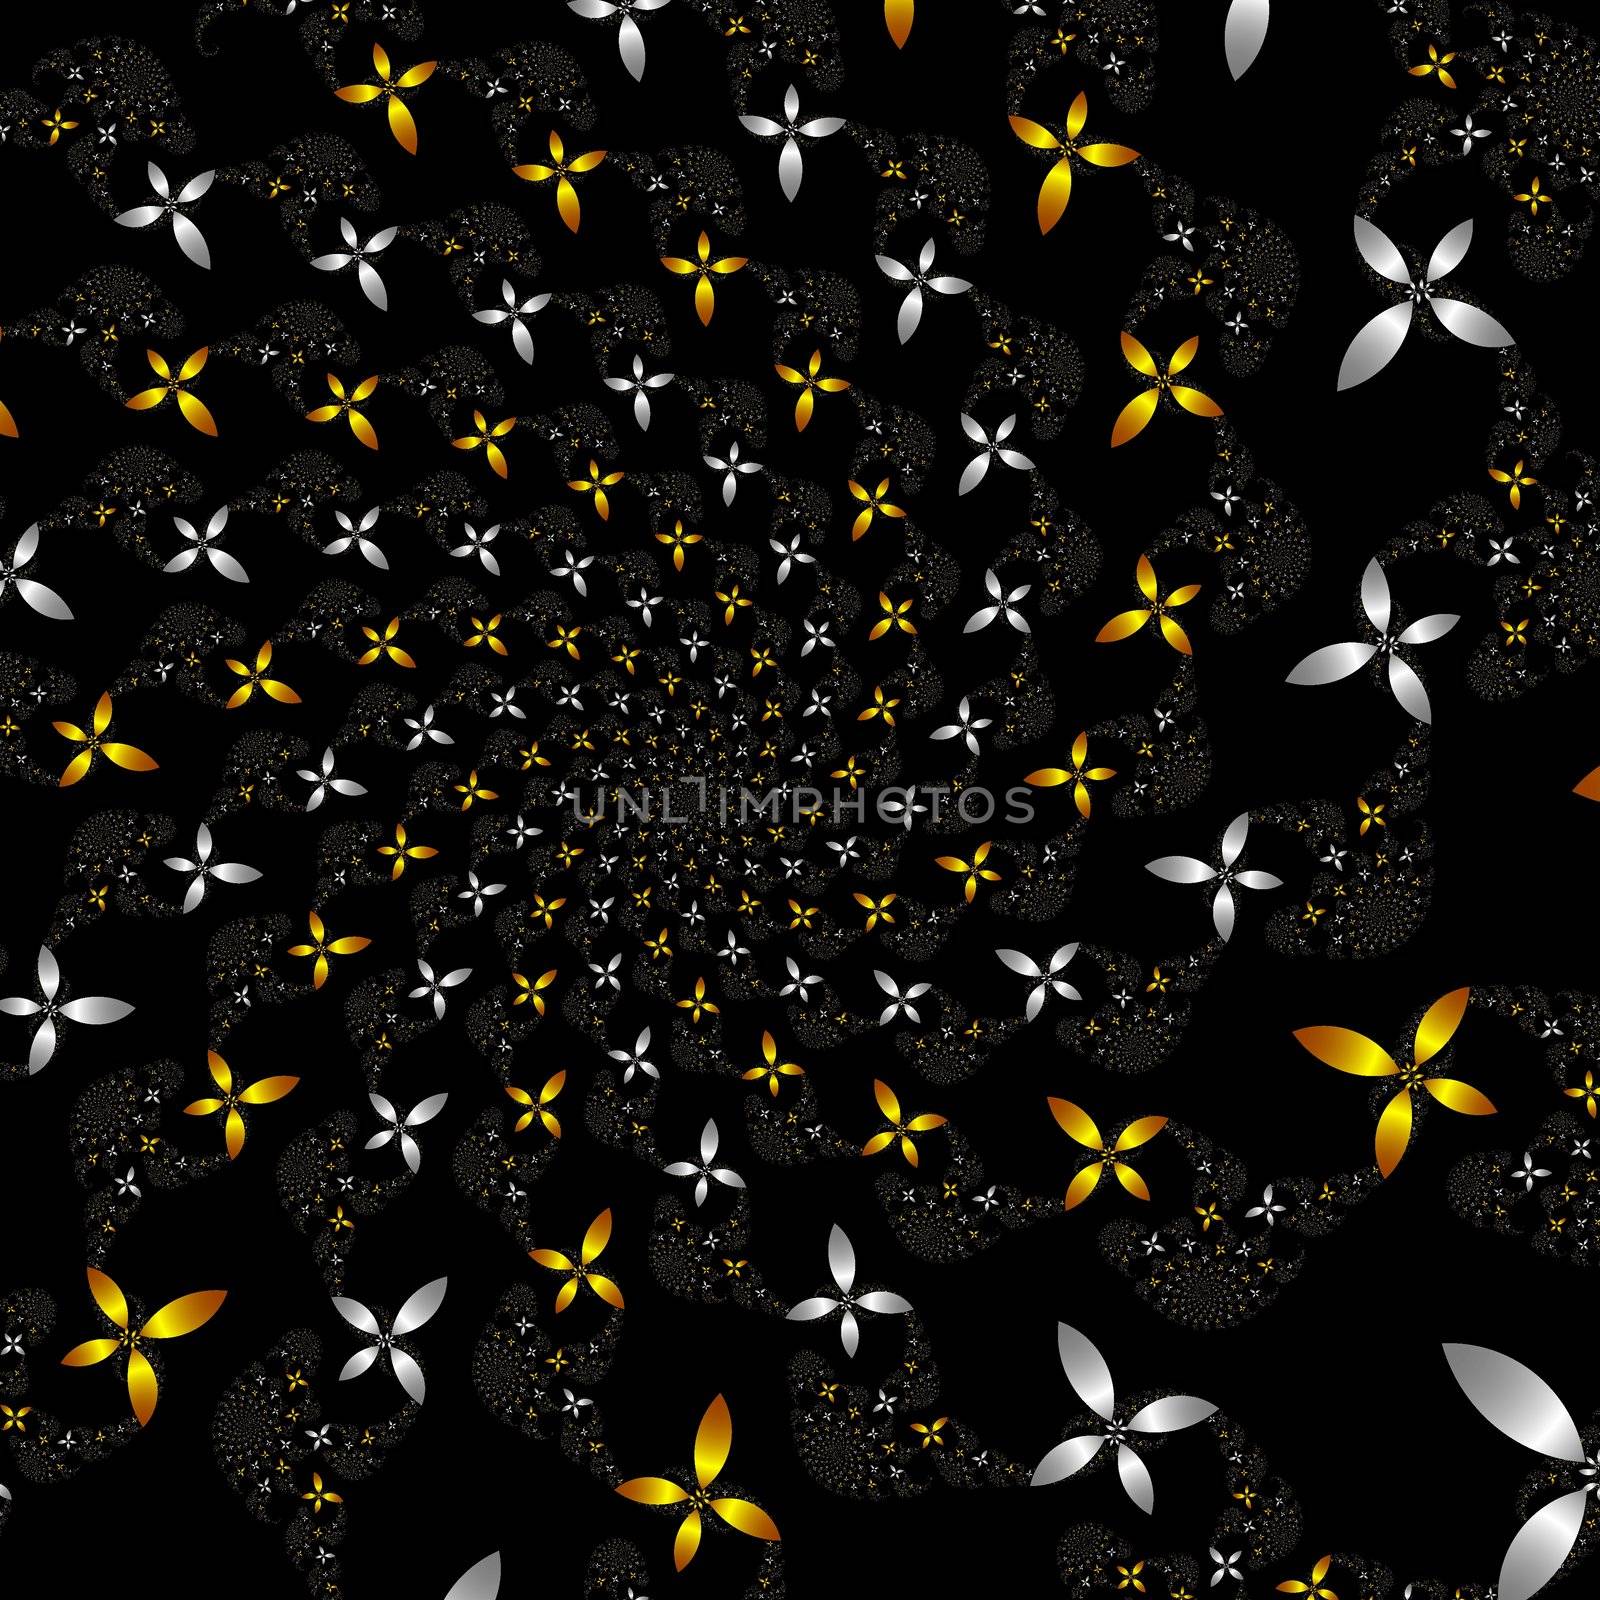 many fractal flowers in gold and silver forming a spiral over black background